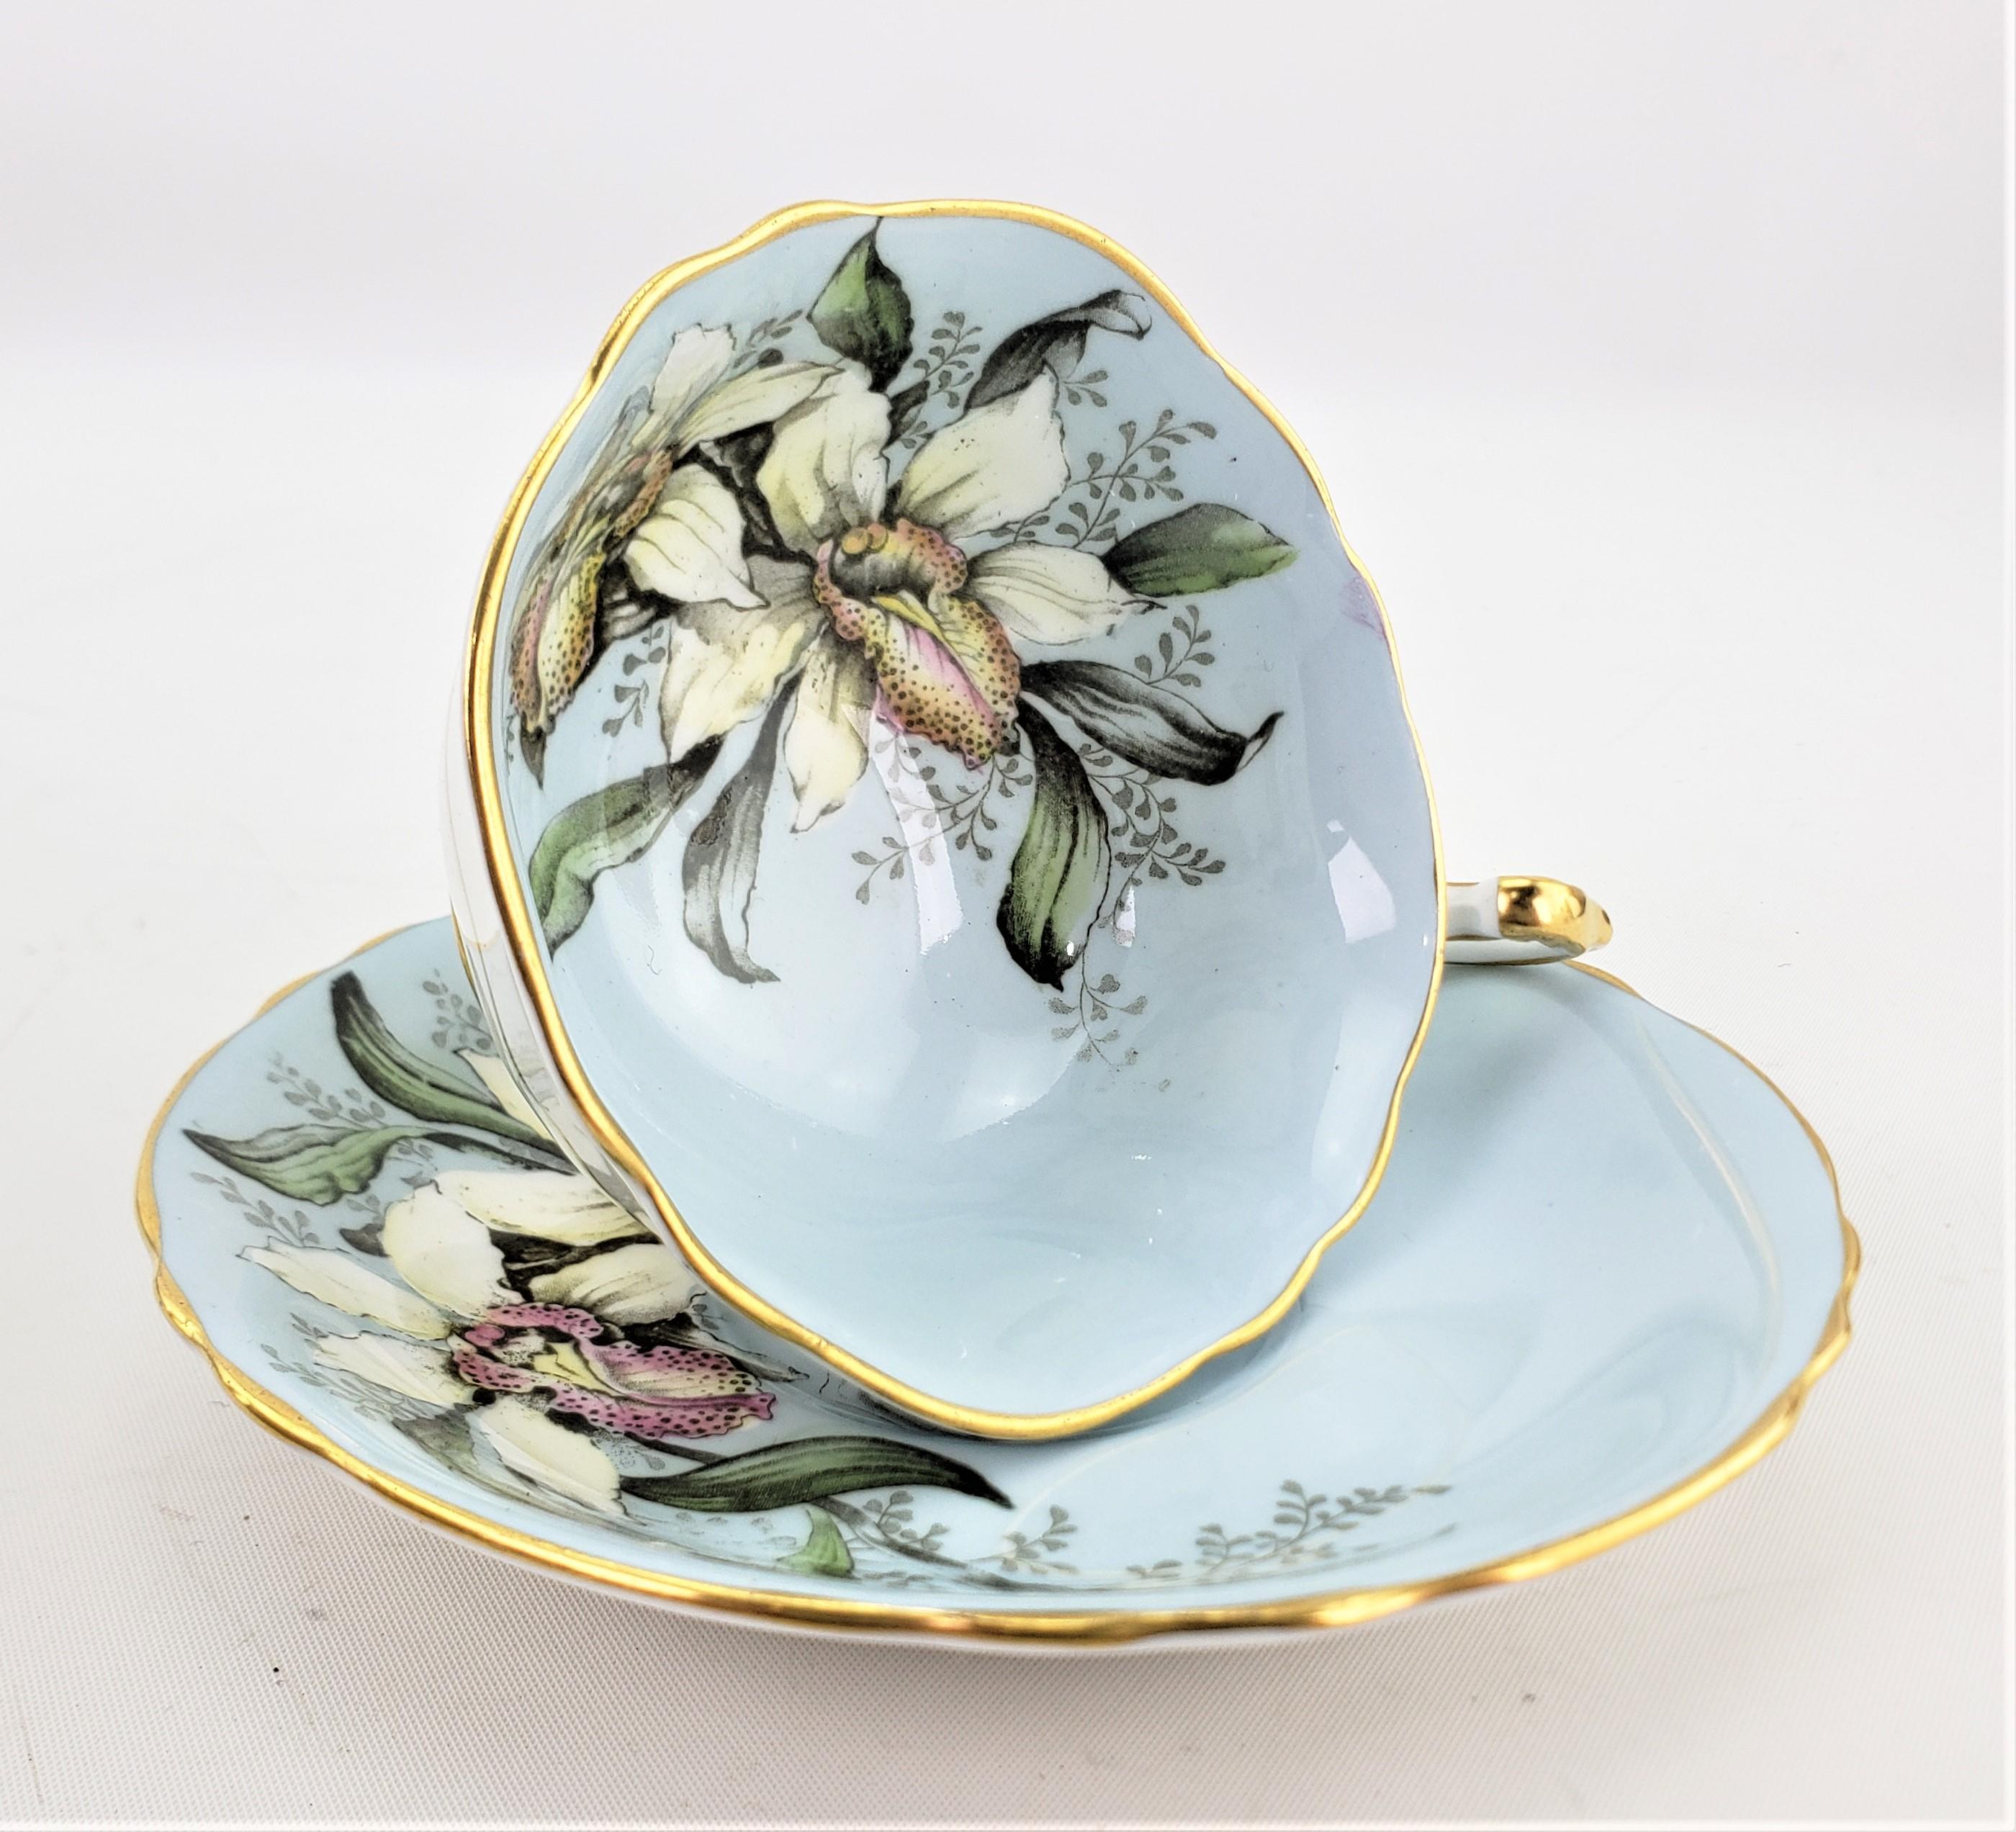 https://a.1stdibscdn.com/vintage-paragon-double-warrant-bone-china-teacup-saucer-with-floral-pattern-for-sale-picture-2/f_13552/f_256837621634046078182/20211011_104142_2__master.jpg